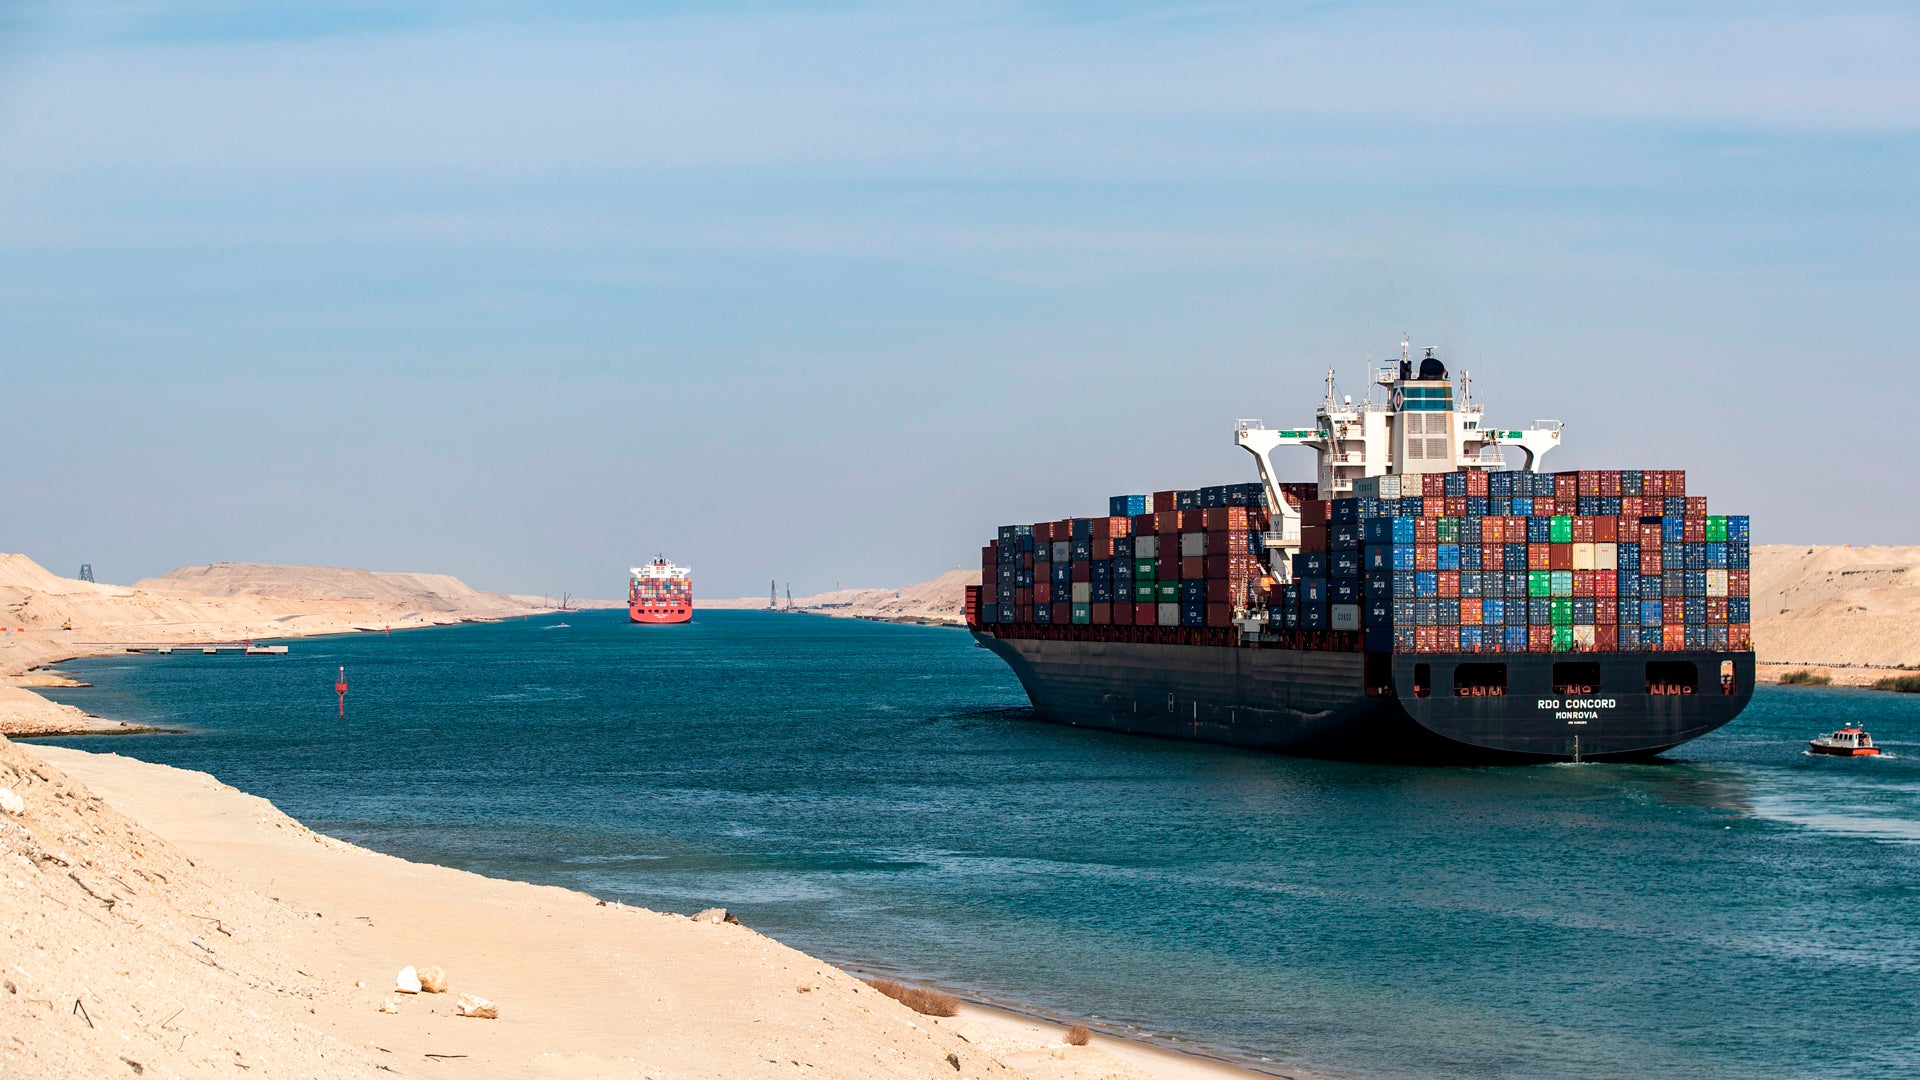 Fascinating Facts About the Suez Canal